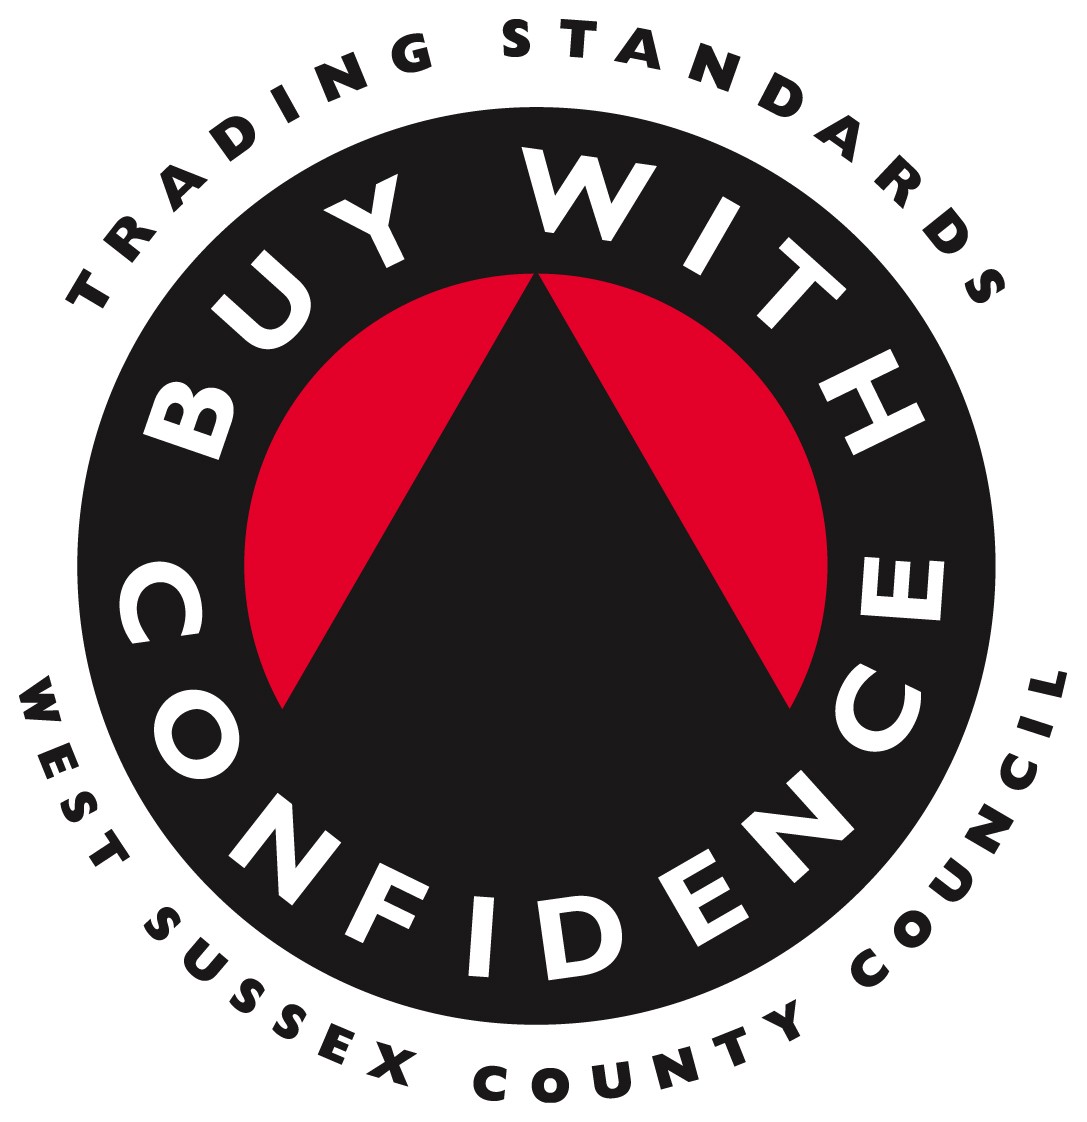 Digital Office Solutions are the only "Trading Standards approved" OKI resellers